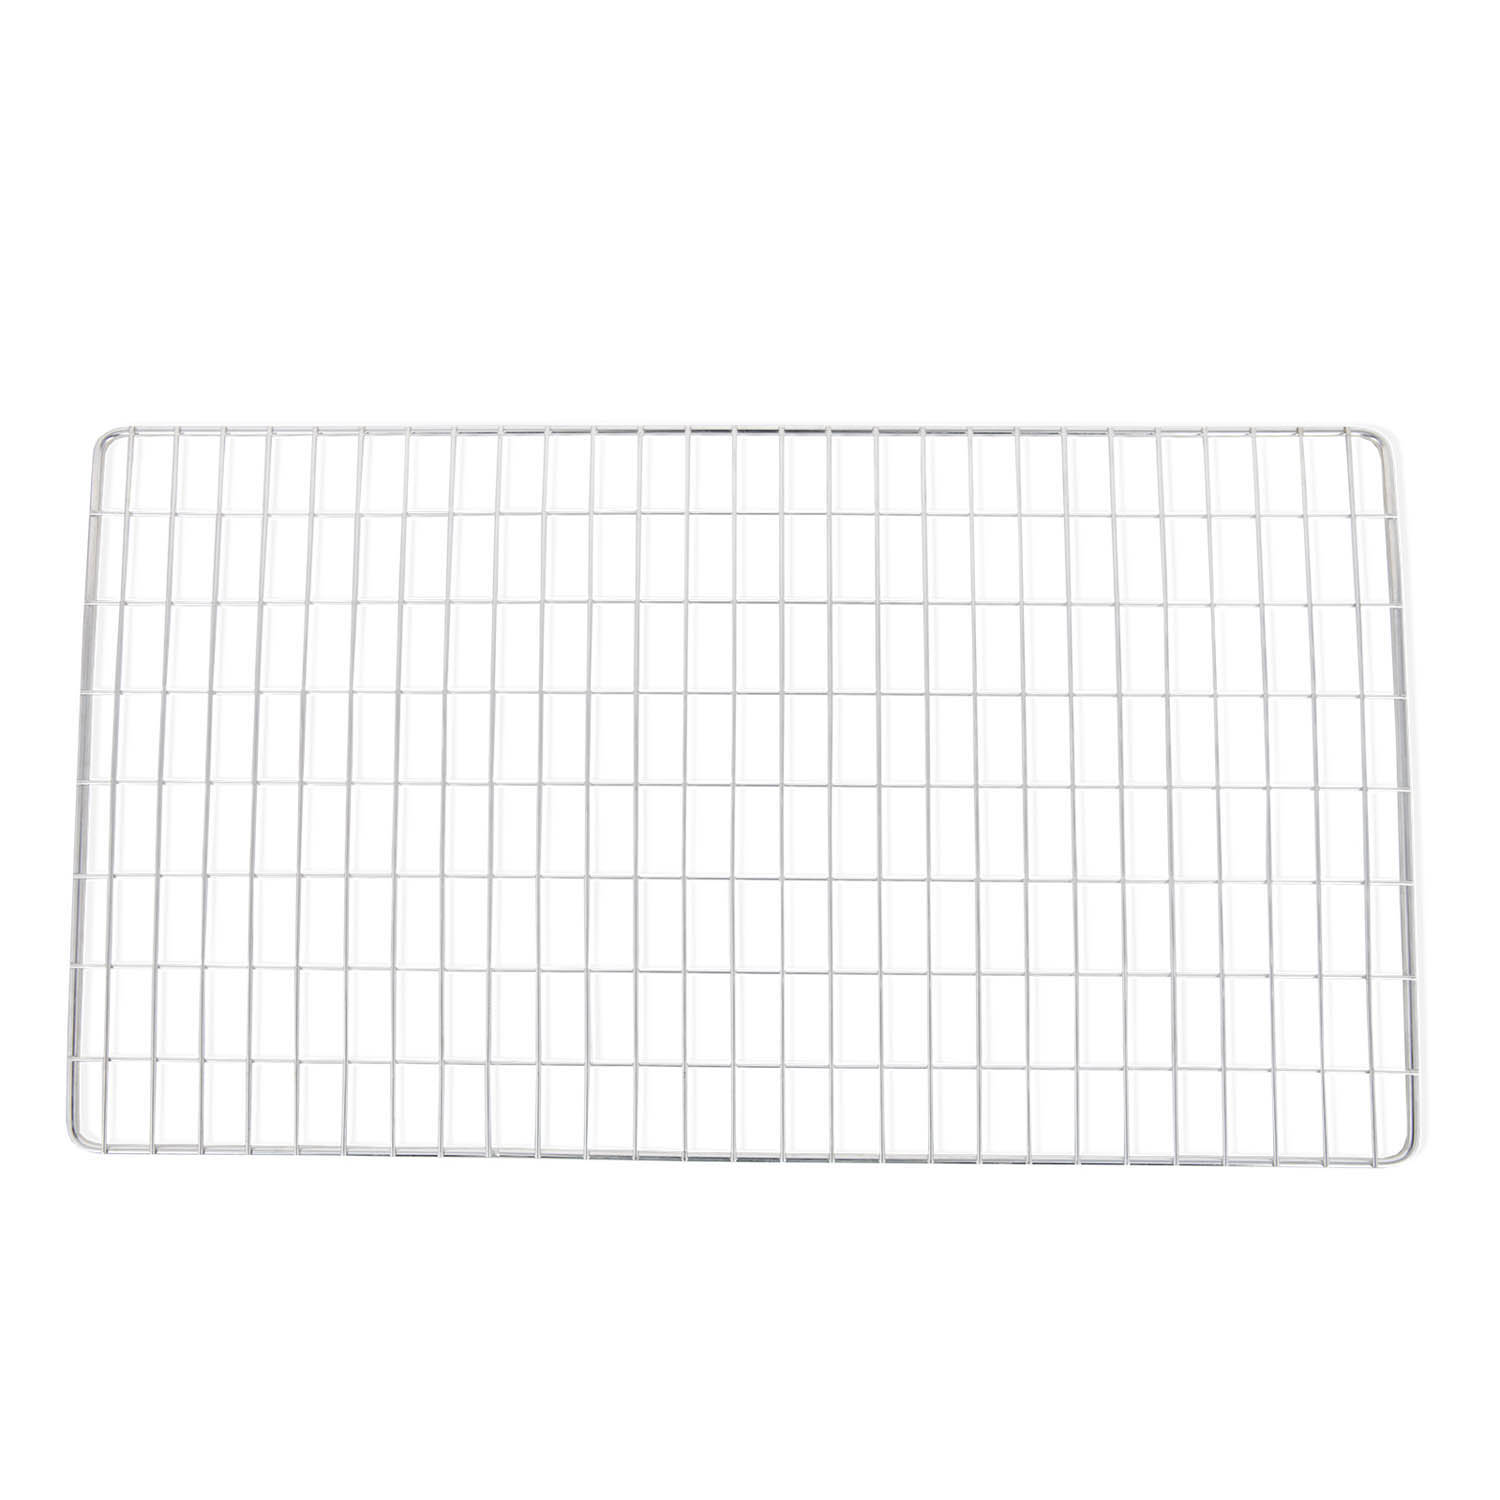 900 x 500 Stainless Steel Grid